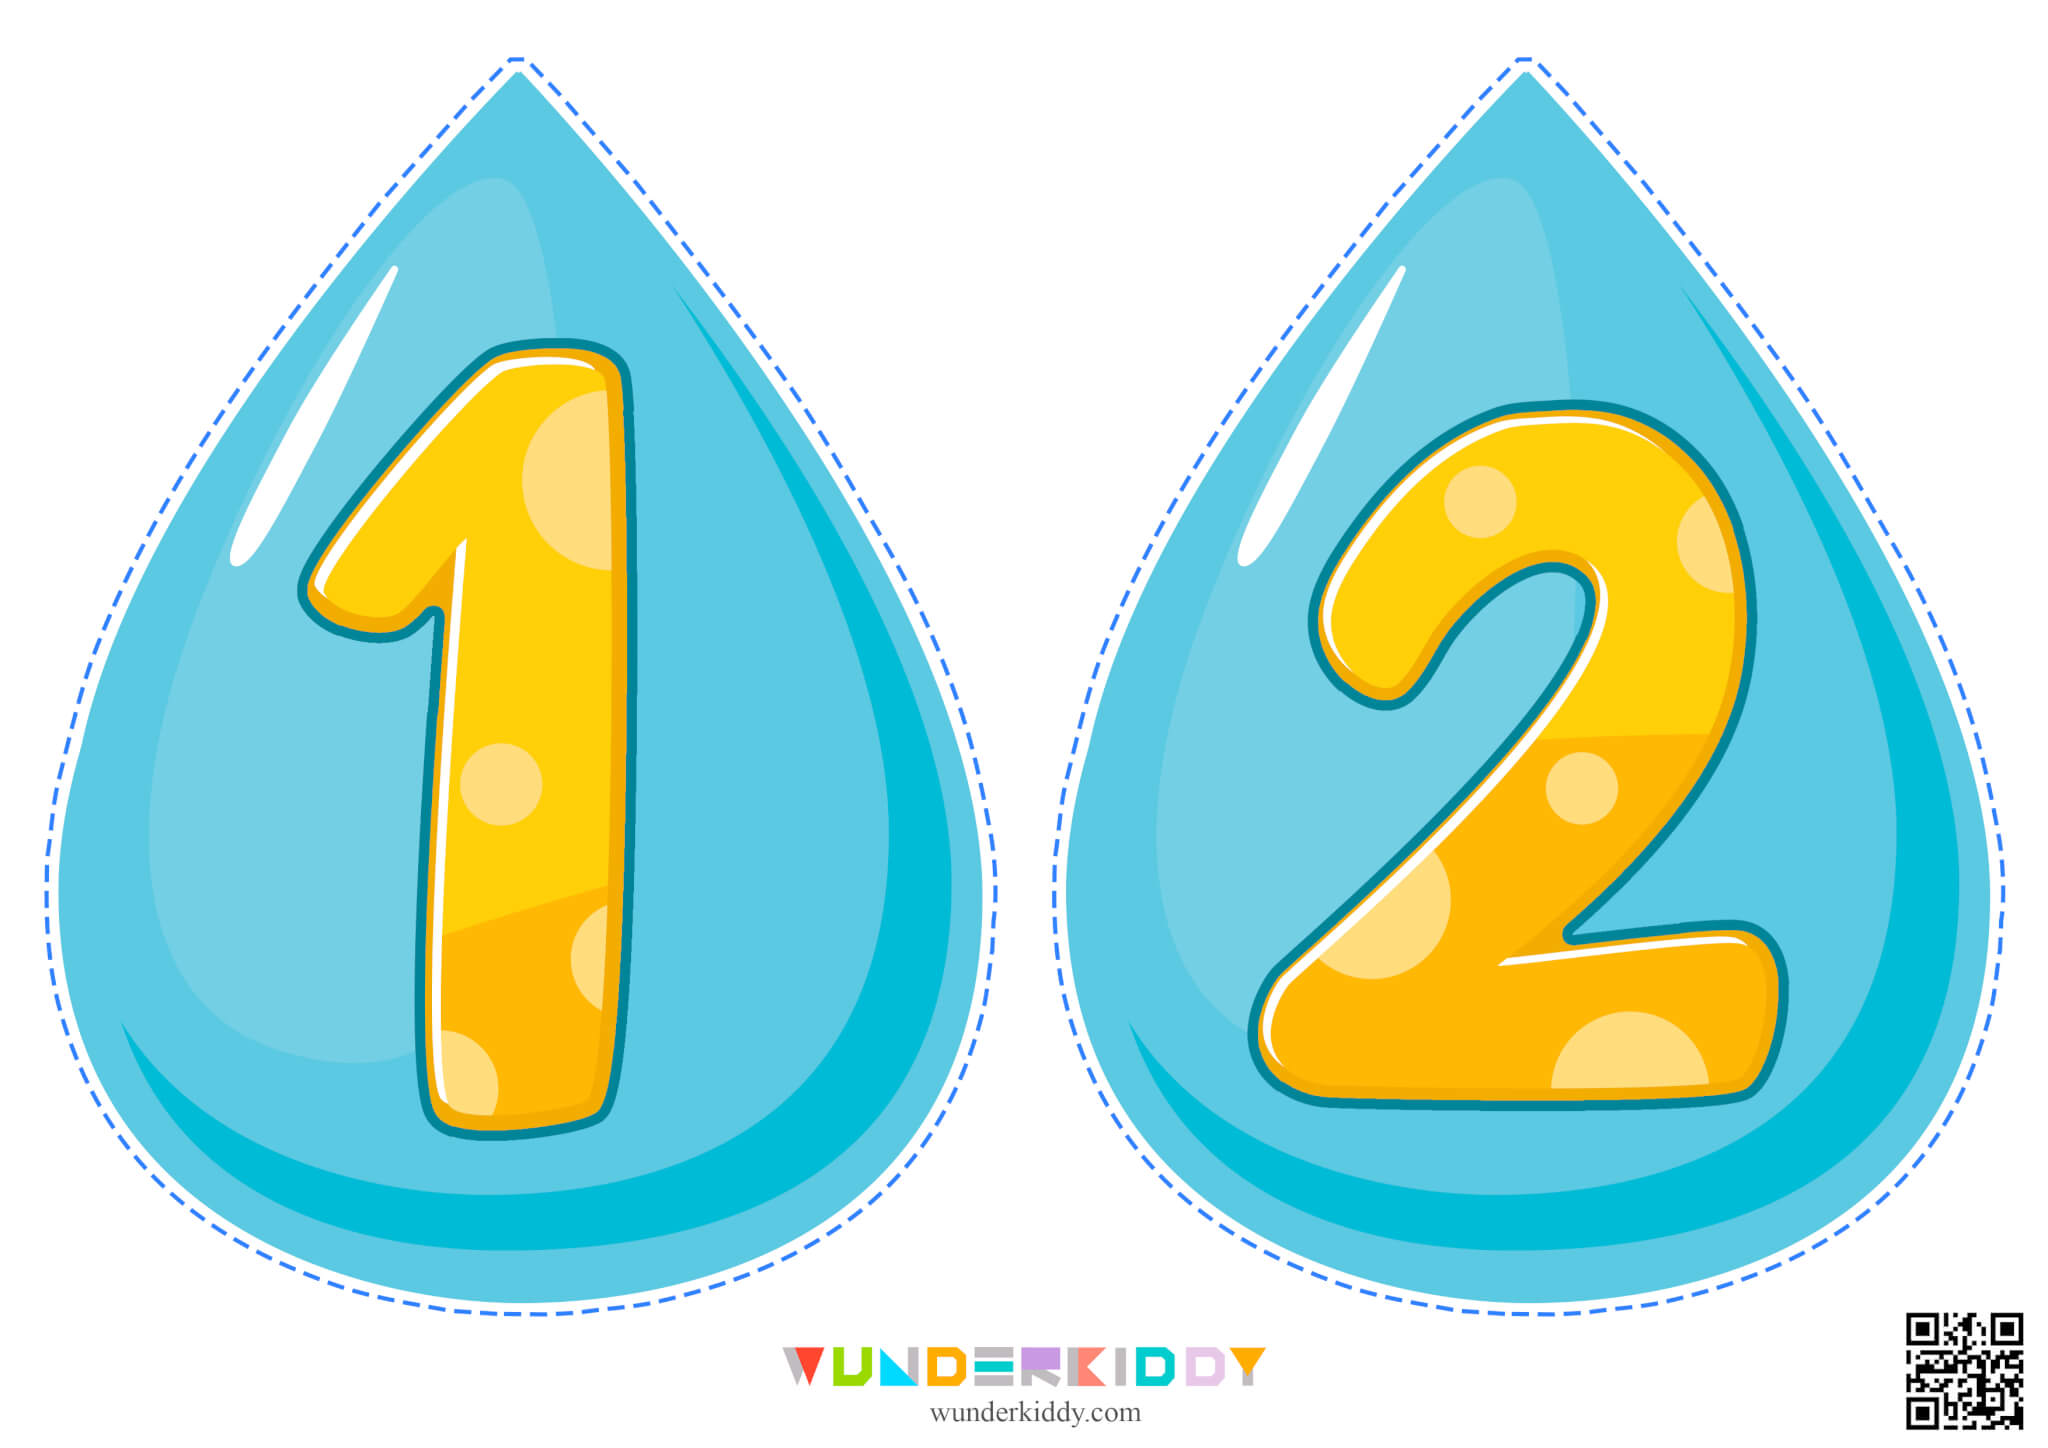 Template «Water droplets» - Image 3